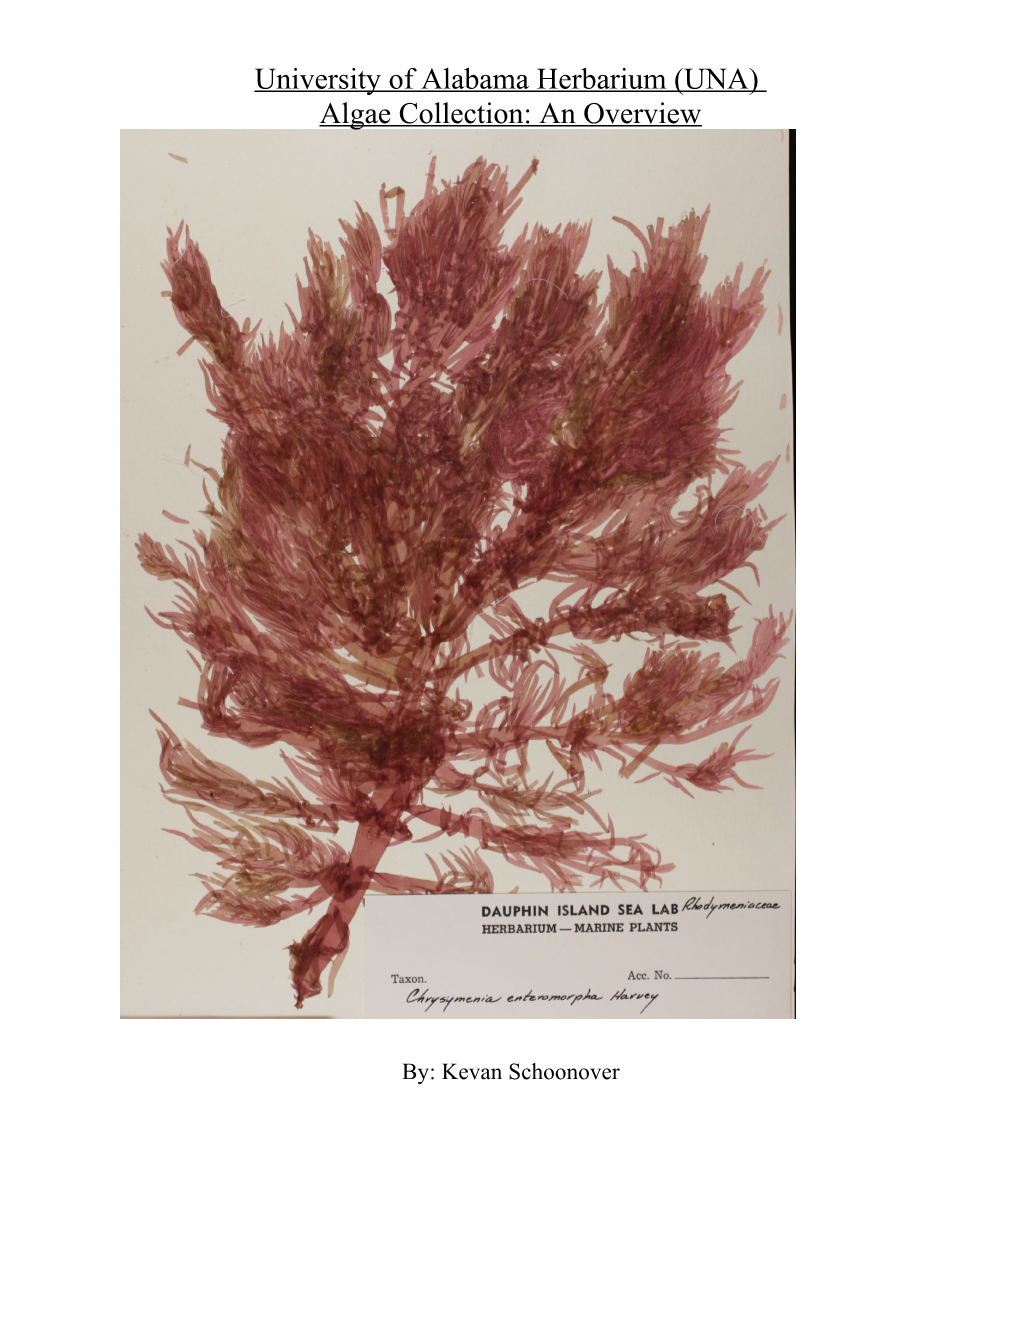 University of Alabama Algae Collection: an Overview